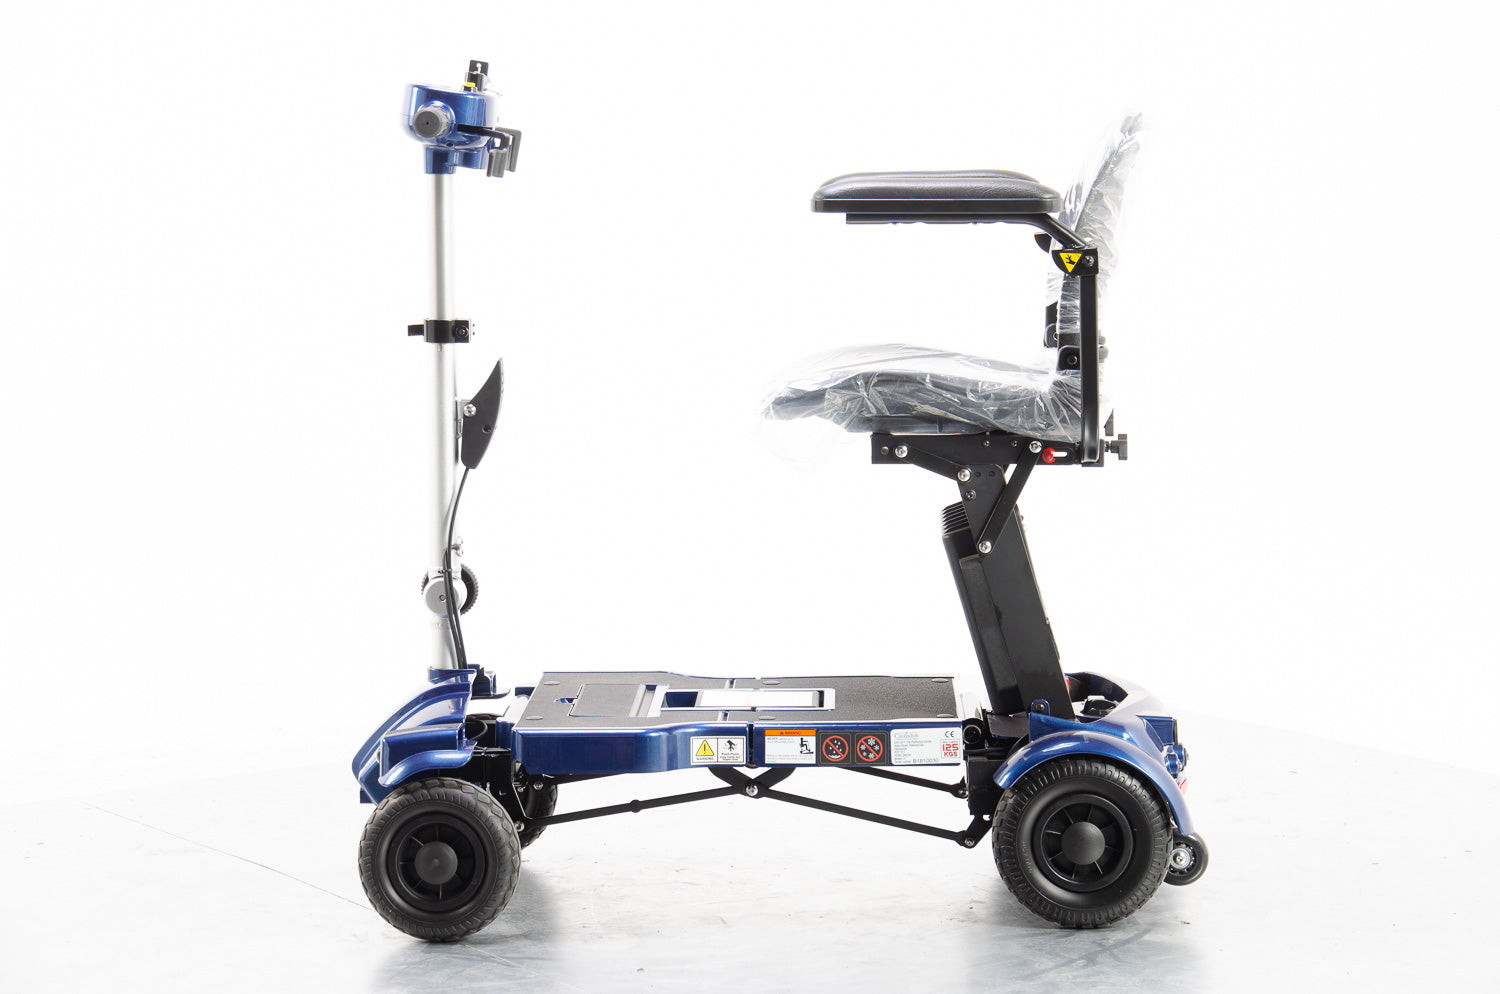 New Cavendish iLiving i3 Folding Lightweight Mobility Scooter Lithium Battery